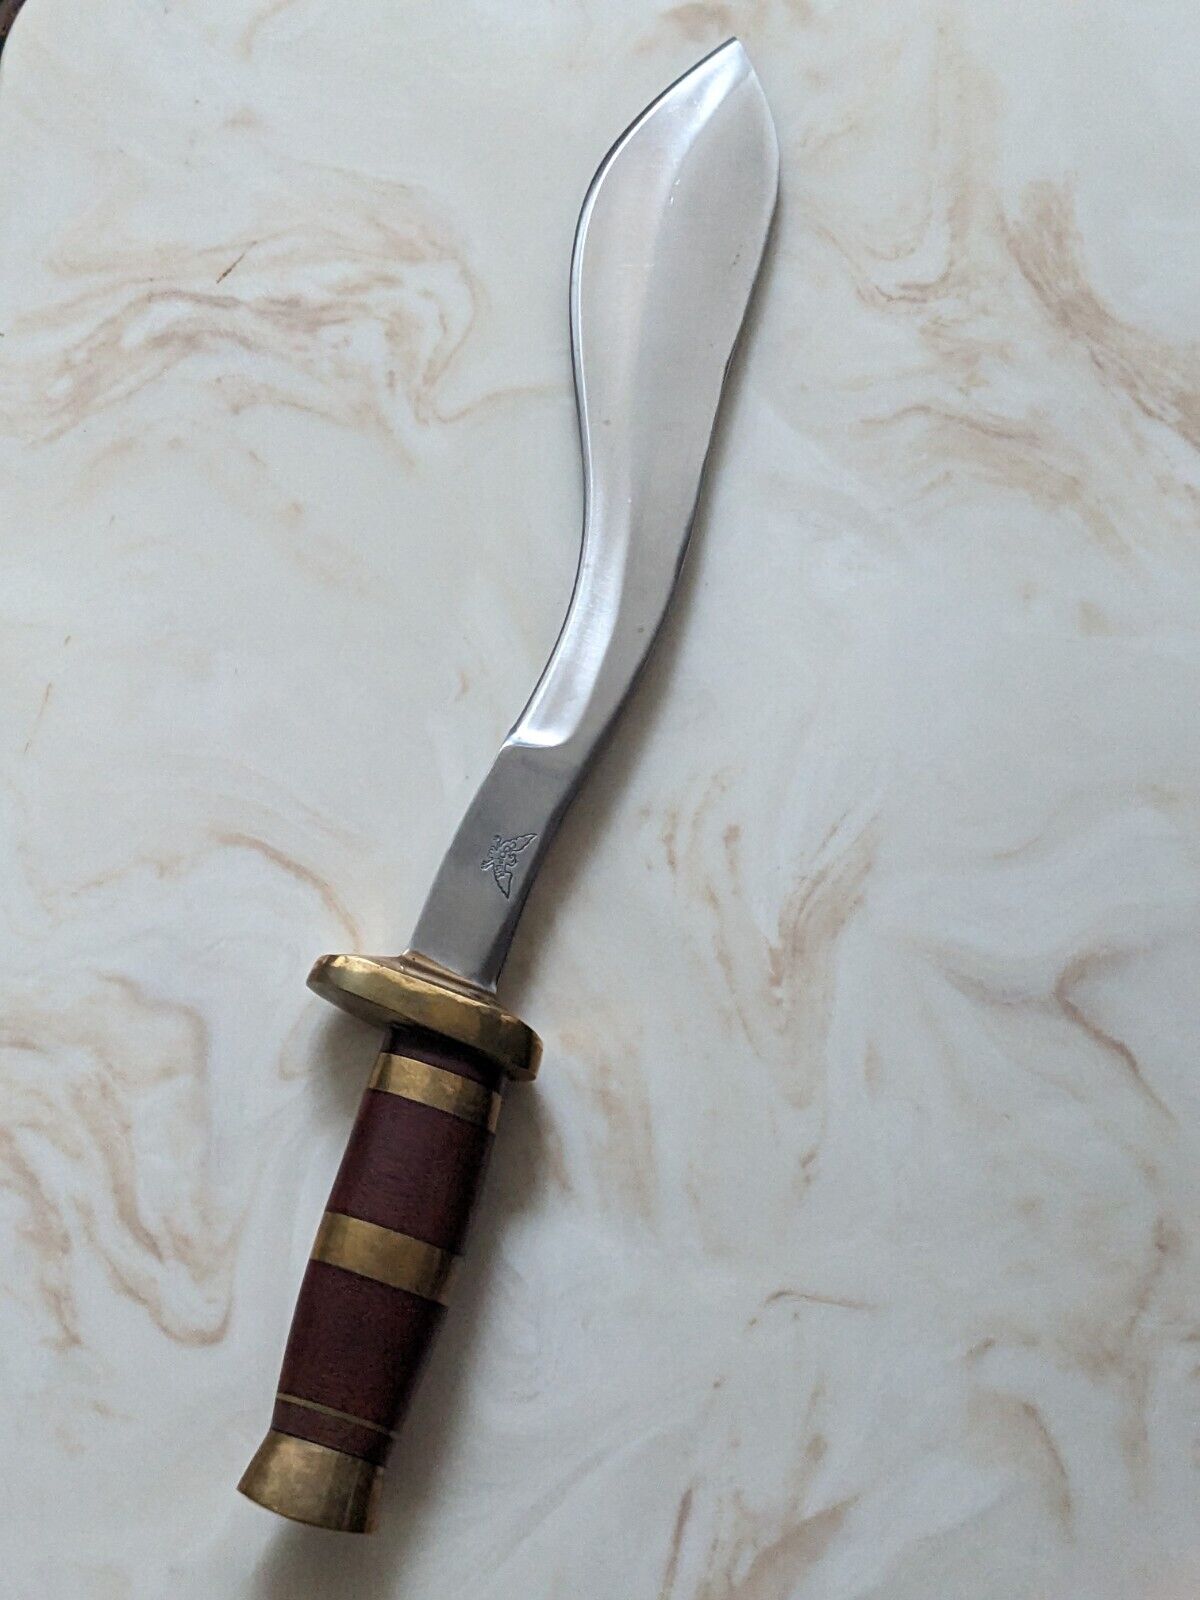 Rare John Nelson Cooper Knife Very Large Bolo Knife, Only One In existence